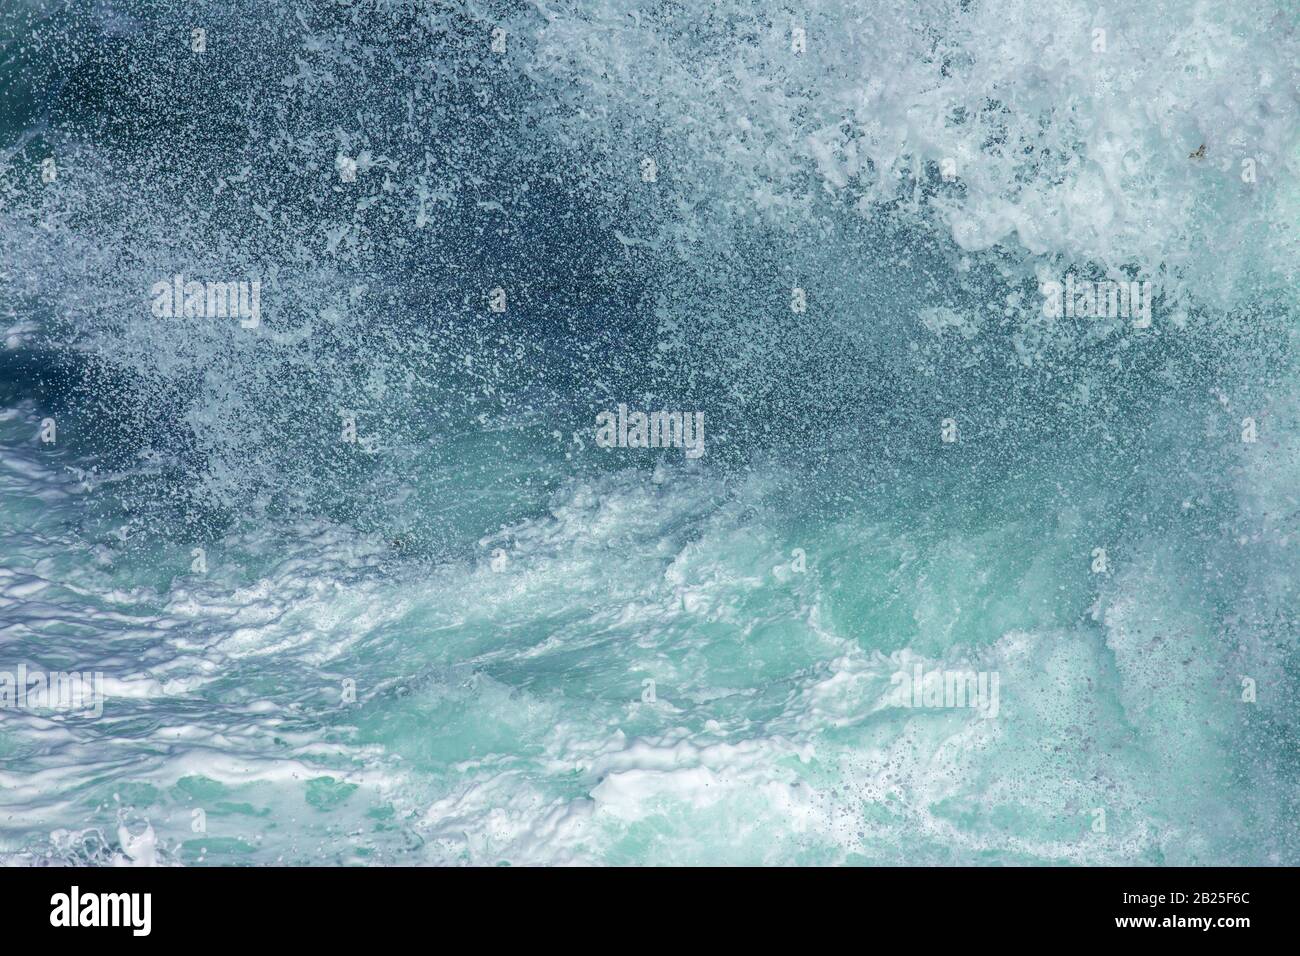 Aquatic background of sea surf waves splashing close up with clear blue green water and white foam Stock Photo